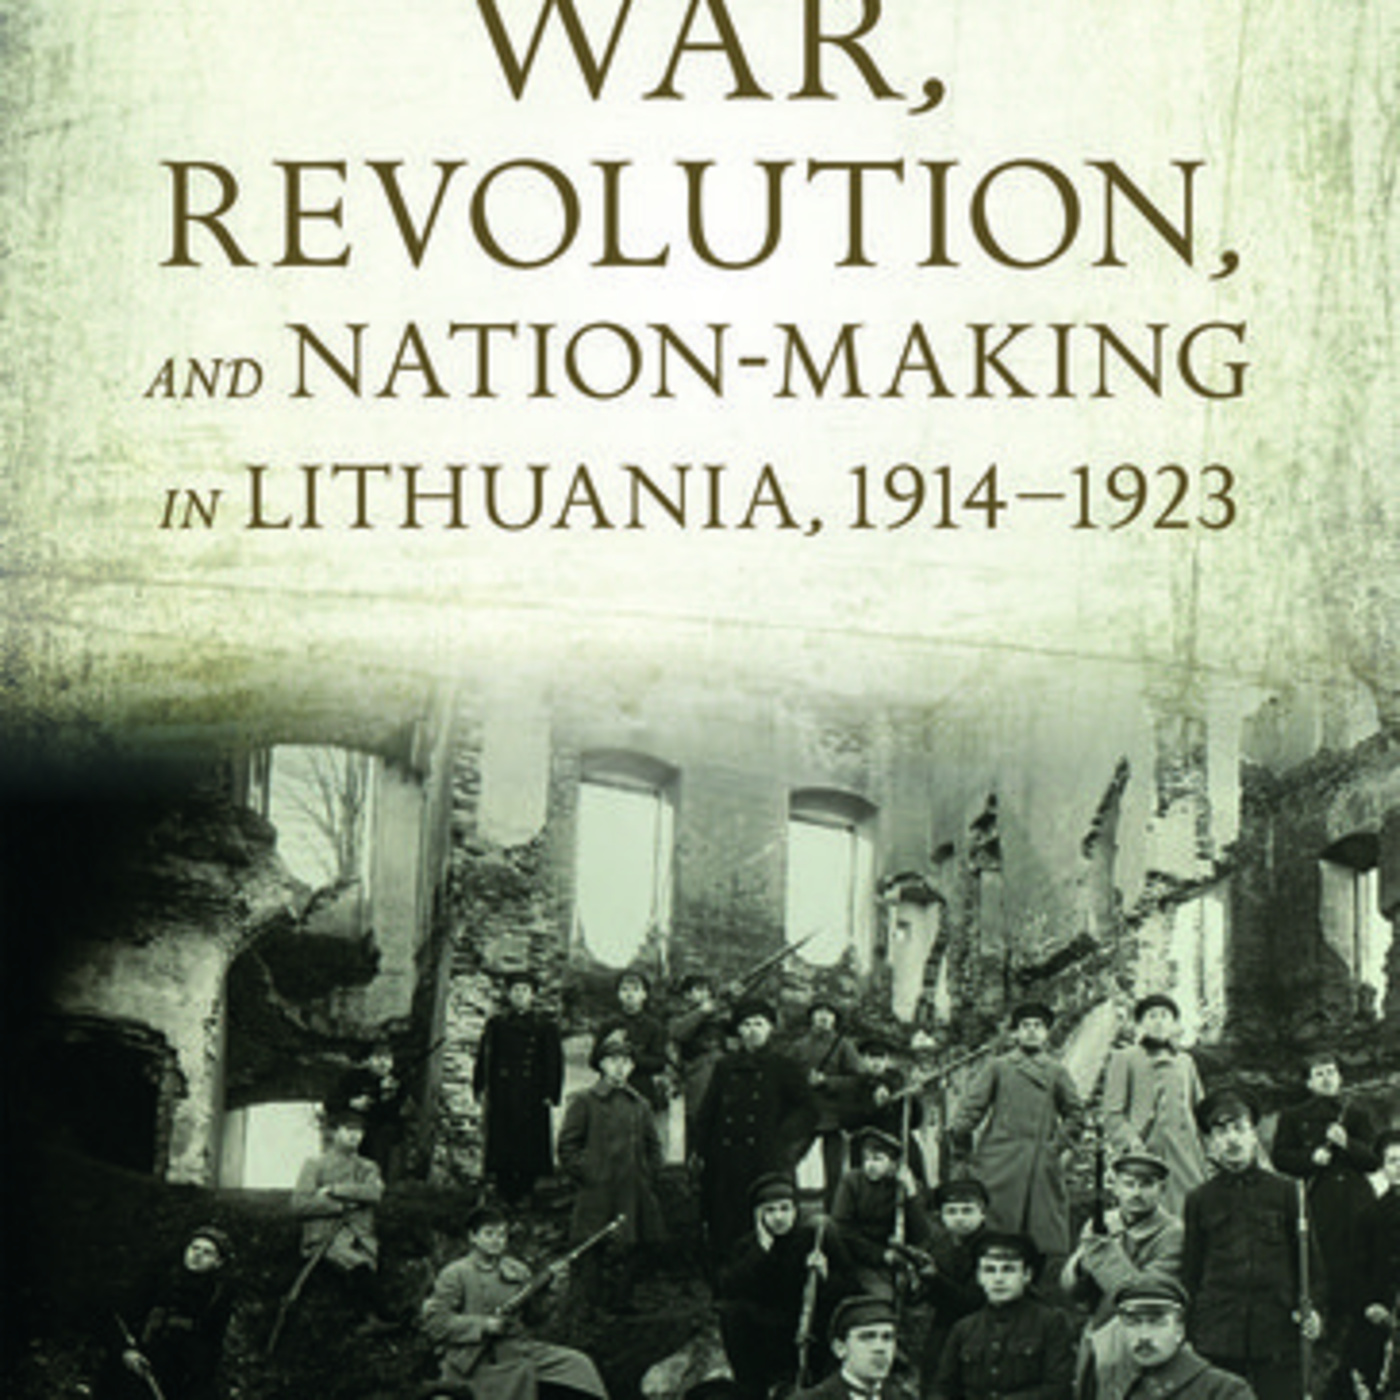 S E41: TGW041 - Tomas Balkelis About War, Revolution, and Nation-Making in Lithuania, 1914-1923